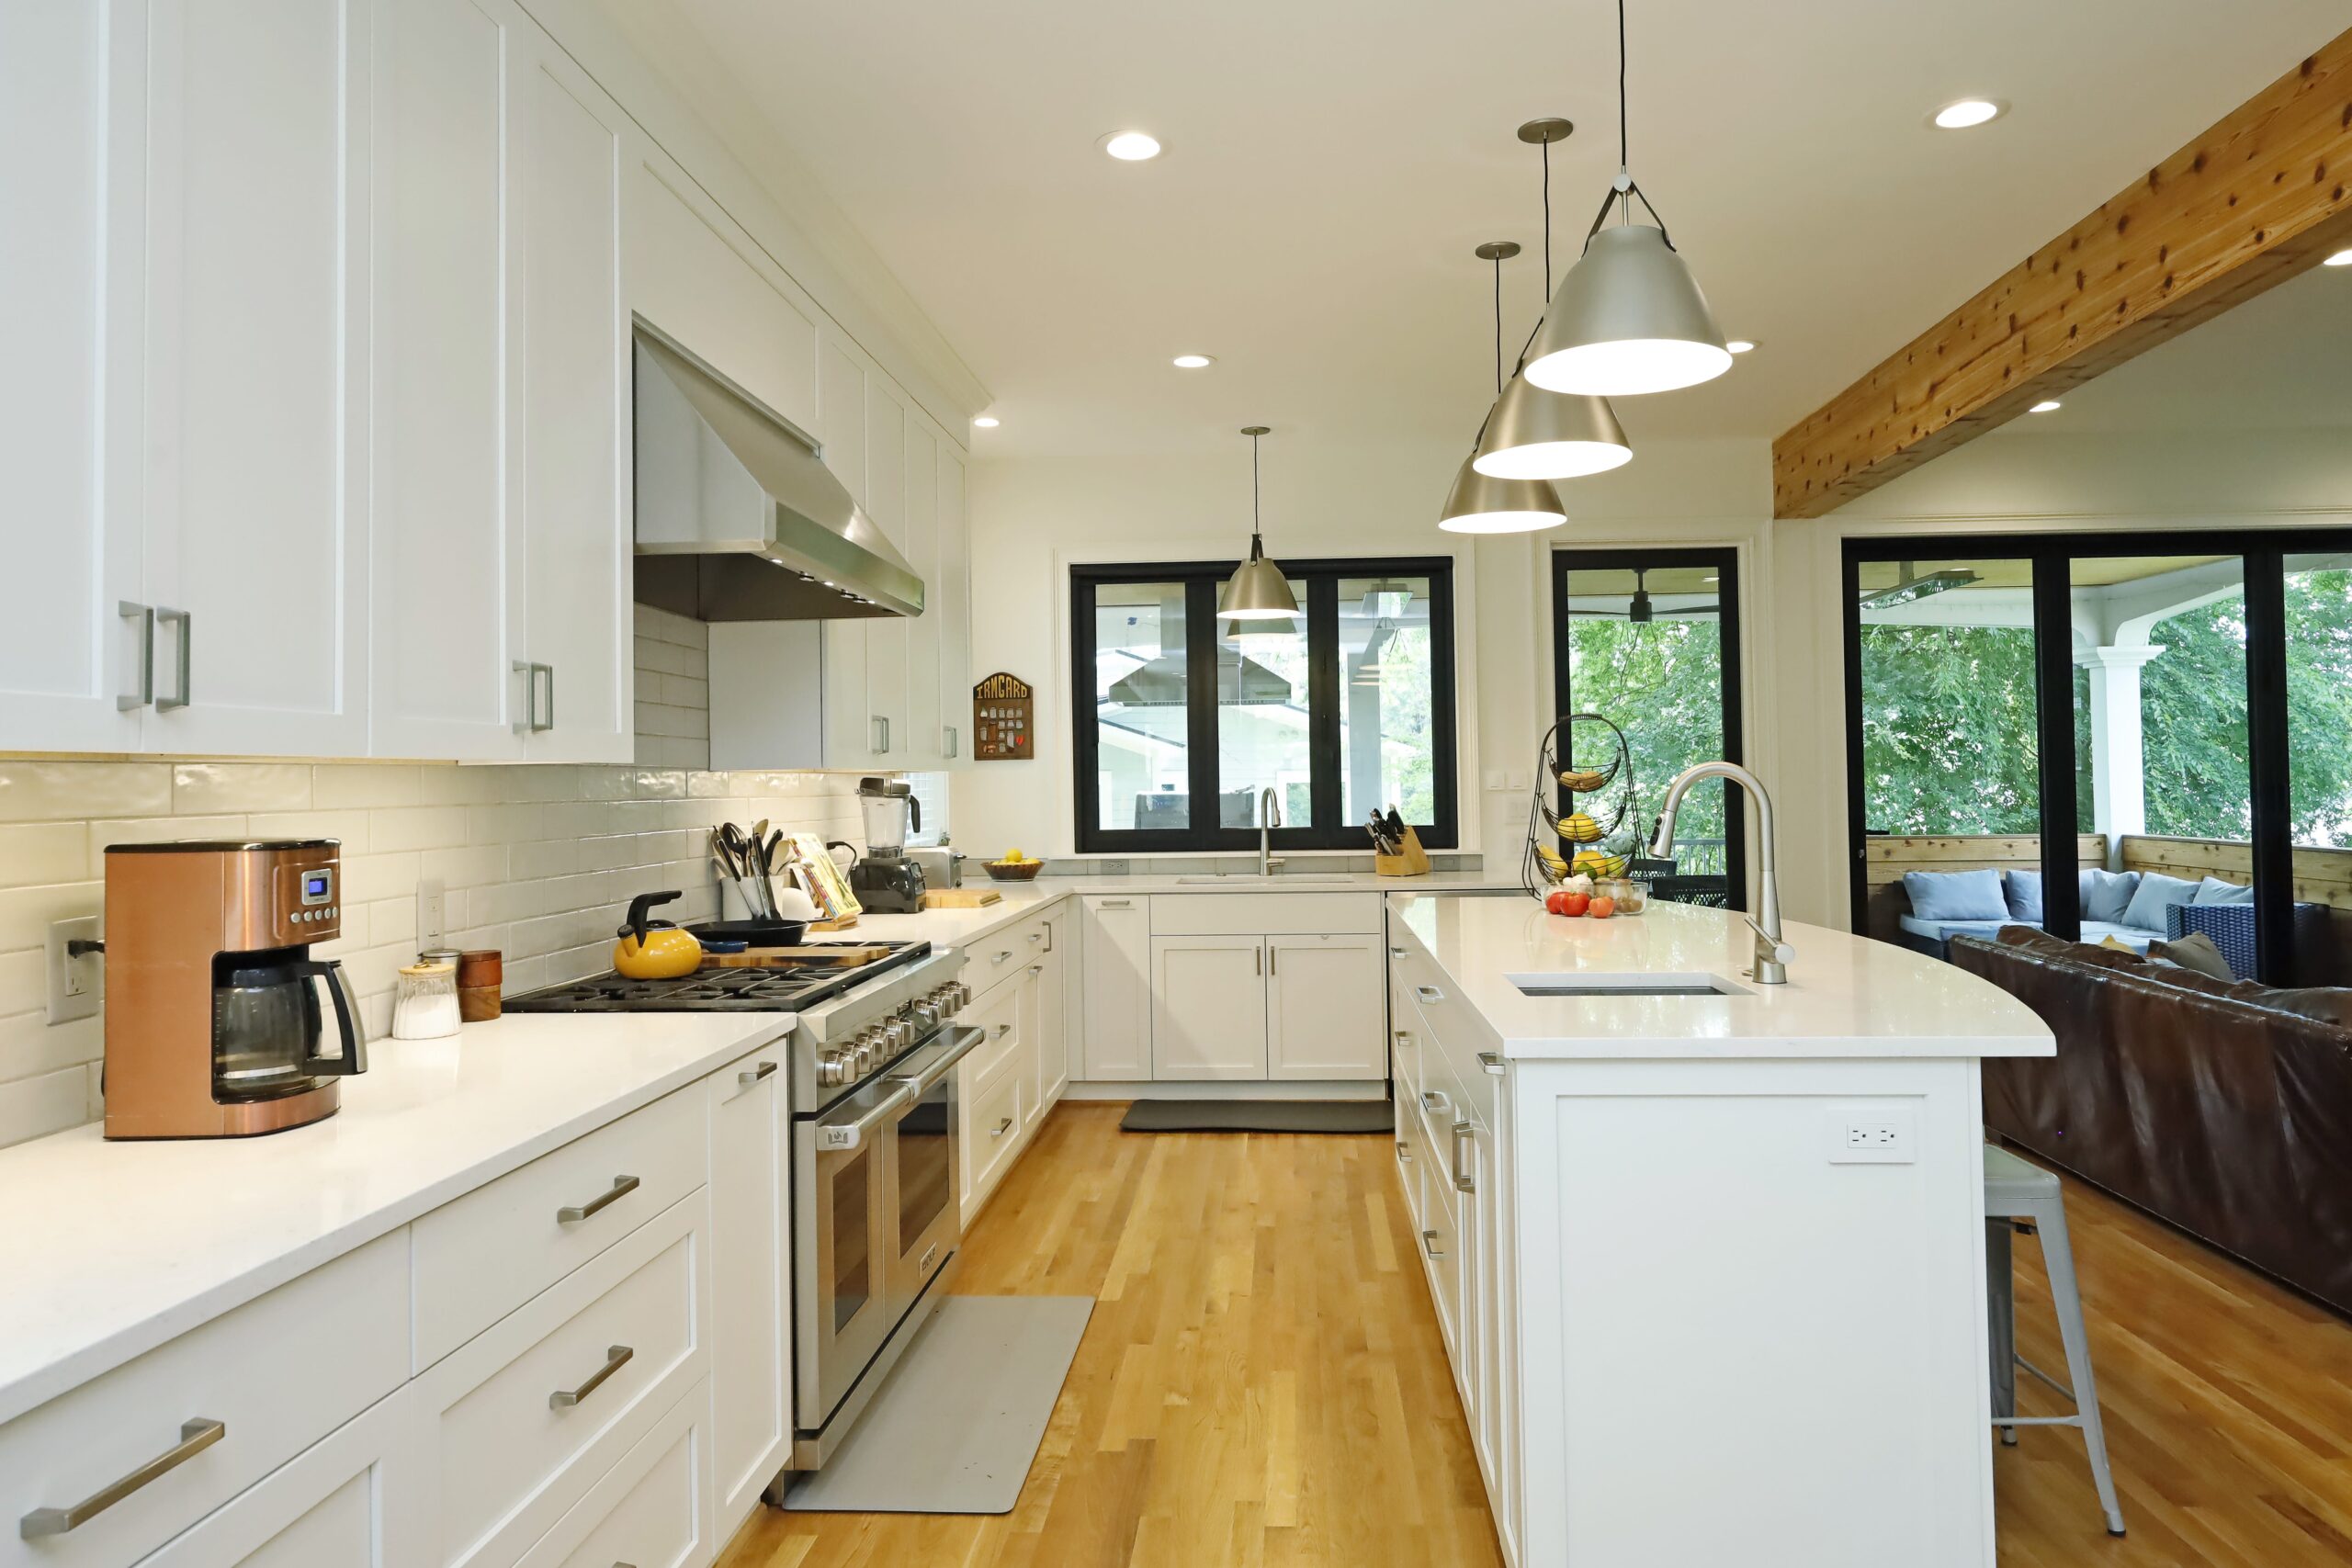 A view through the kitchen towards the covered deck highlights the generous kitchen prep space, sleek white counters and cabinets, and large accordions doors and windows onto the deck.